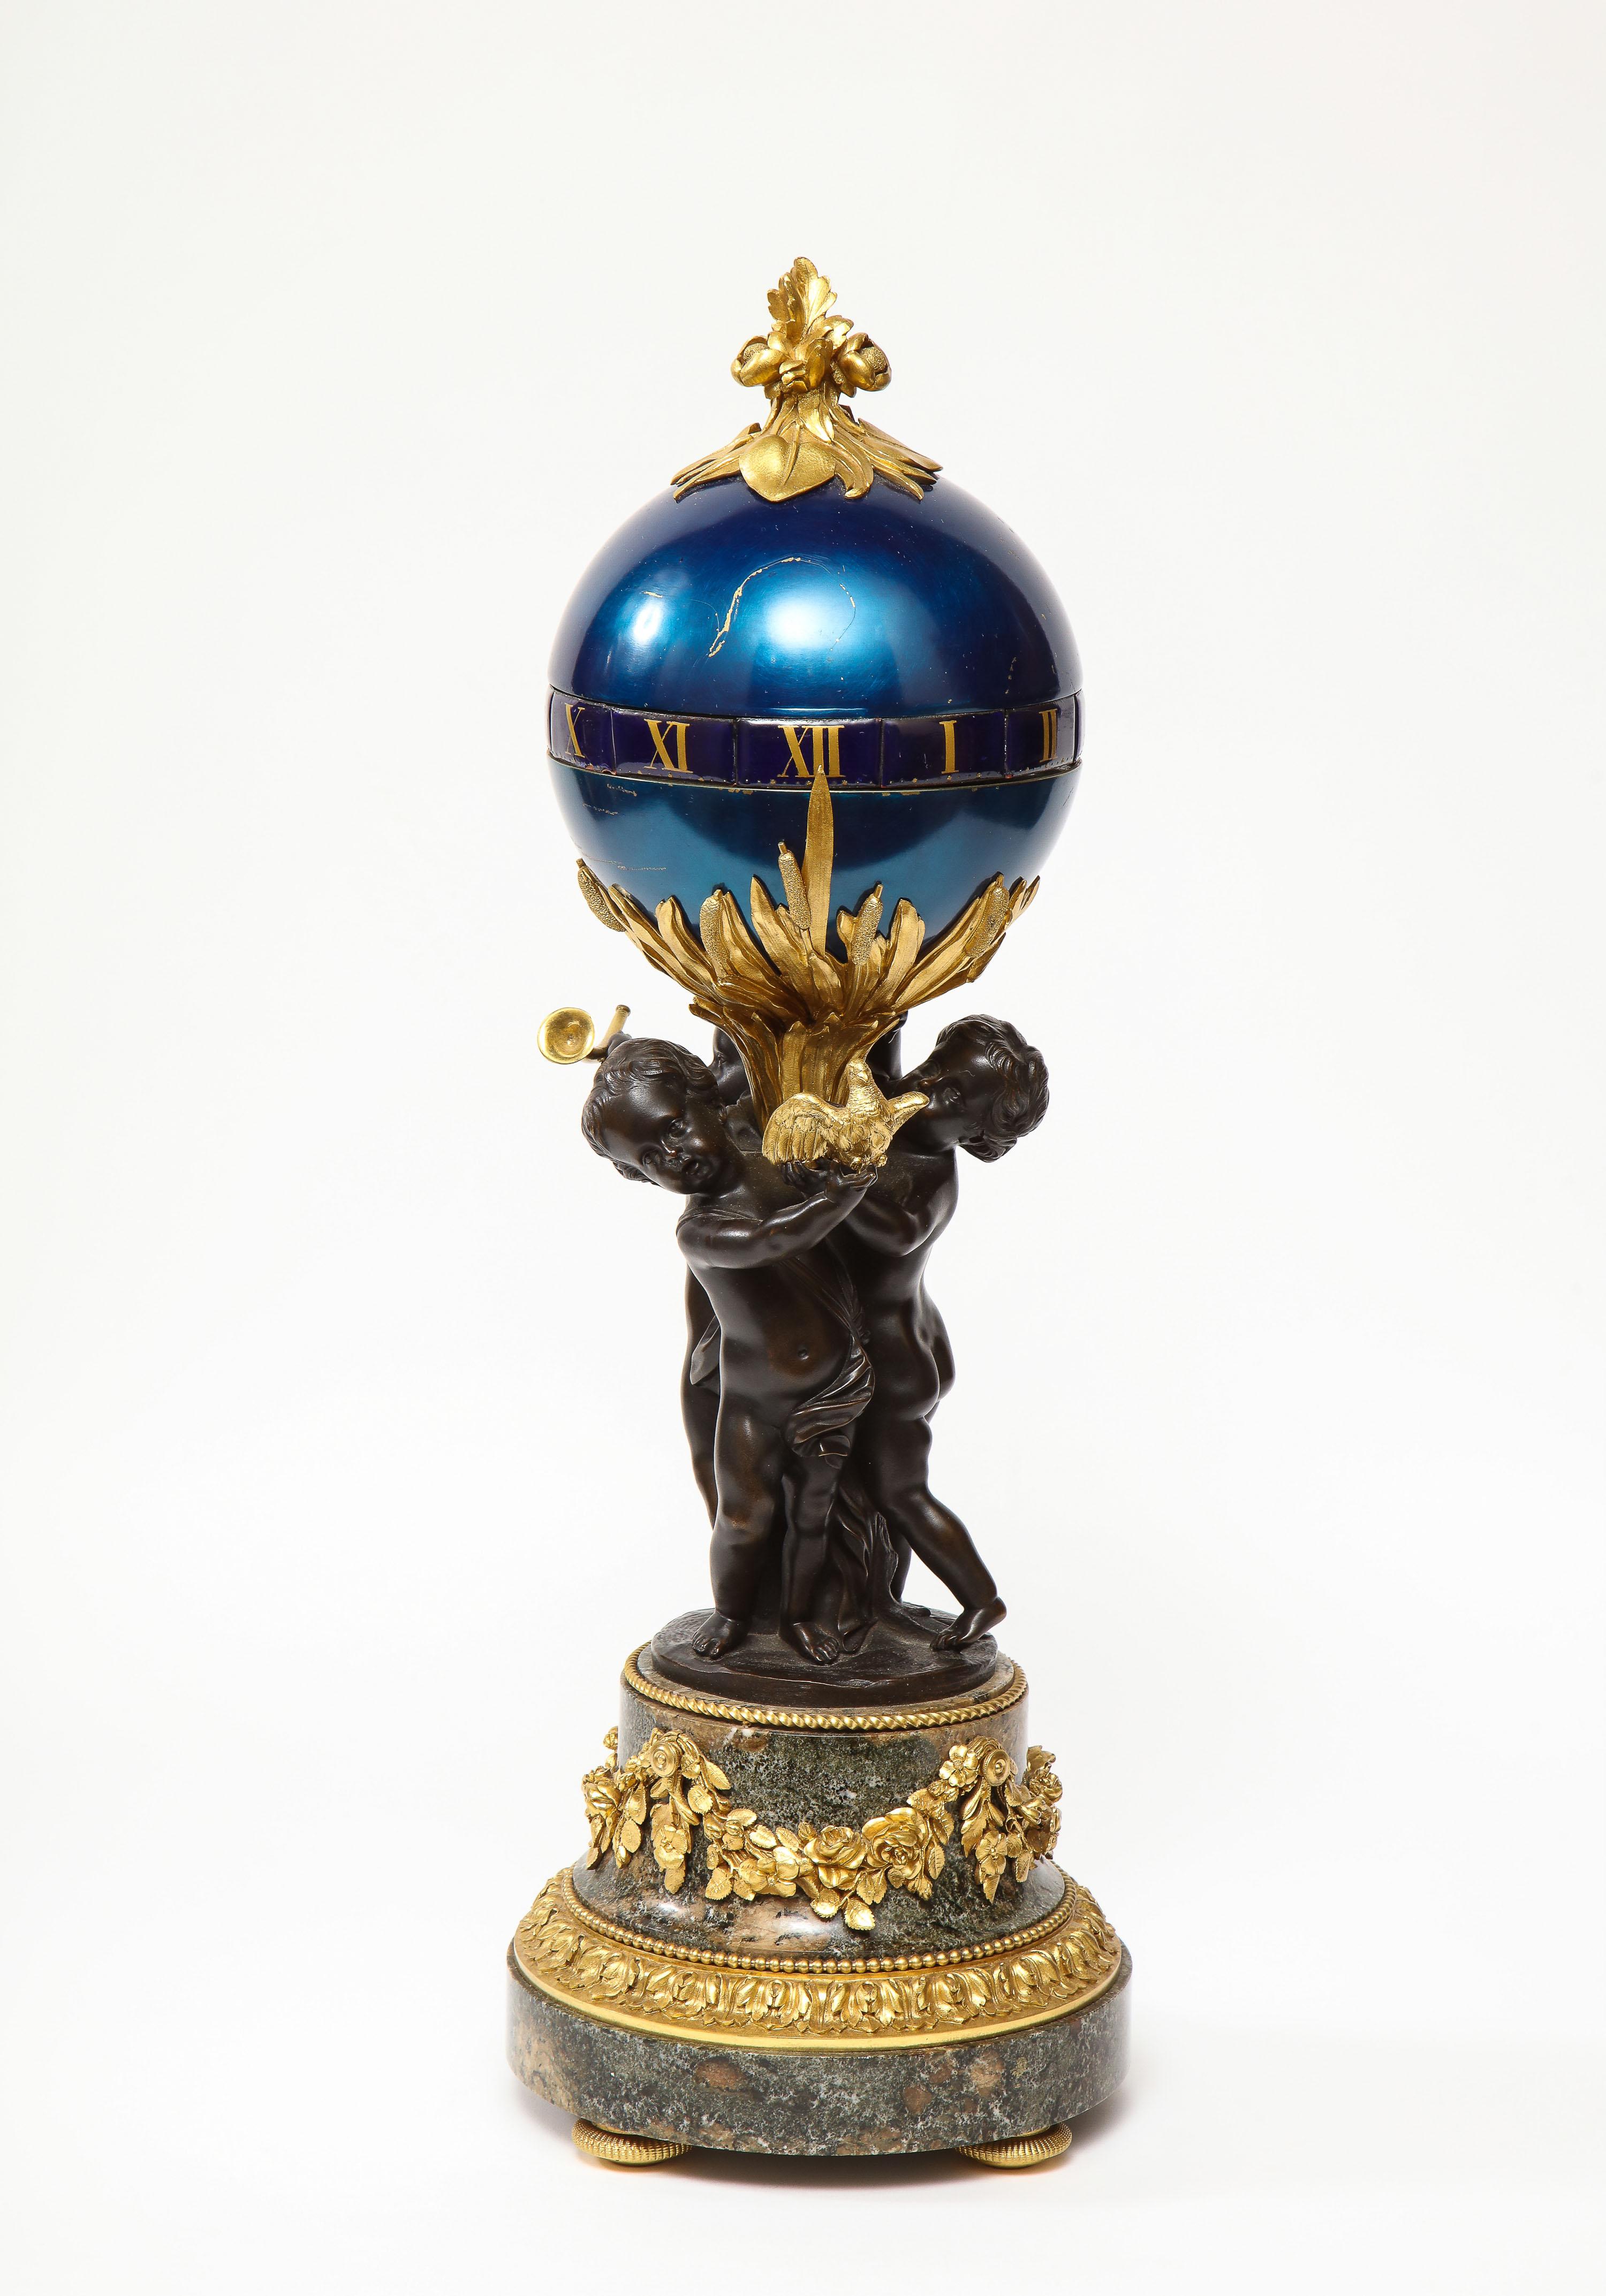 A French gilt and patinated bronze, marble, and enamel annular dial clock by Henry Dasson, Paris, 1891.

Bronze floral finial atop a blue enameled globe with gilt Roman numeral porcelain annular dial, three patinated bronze cherubs mounted to a